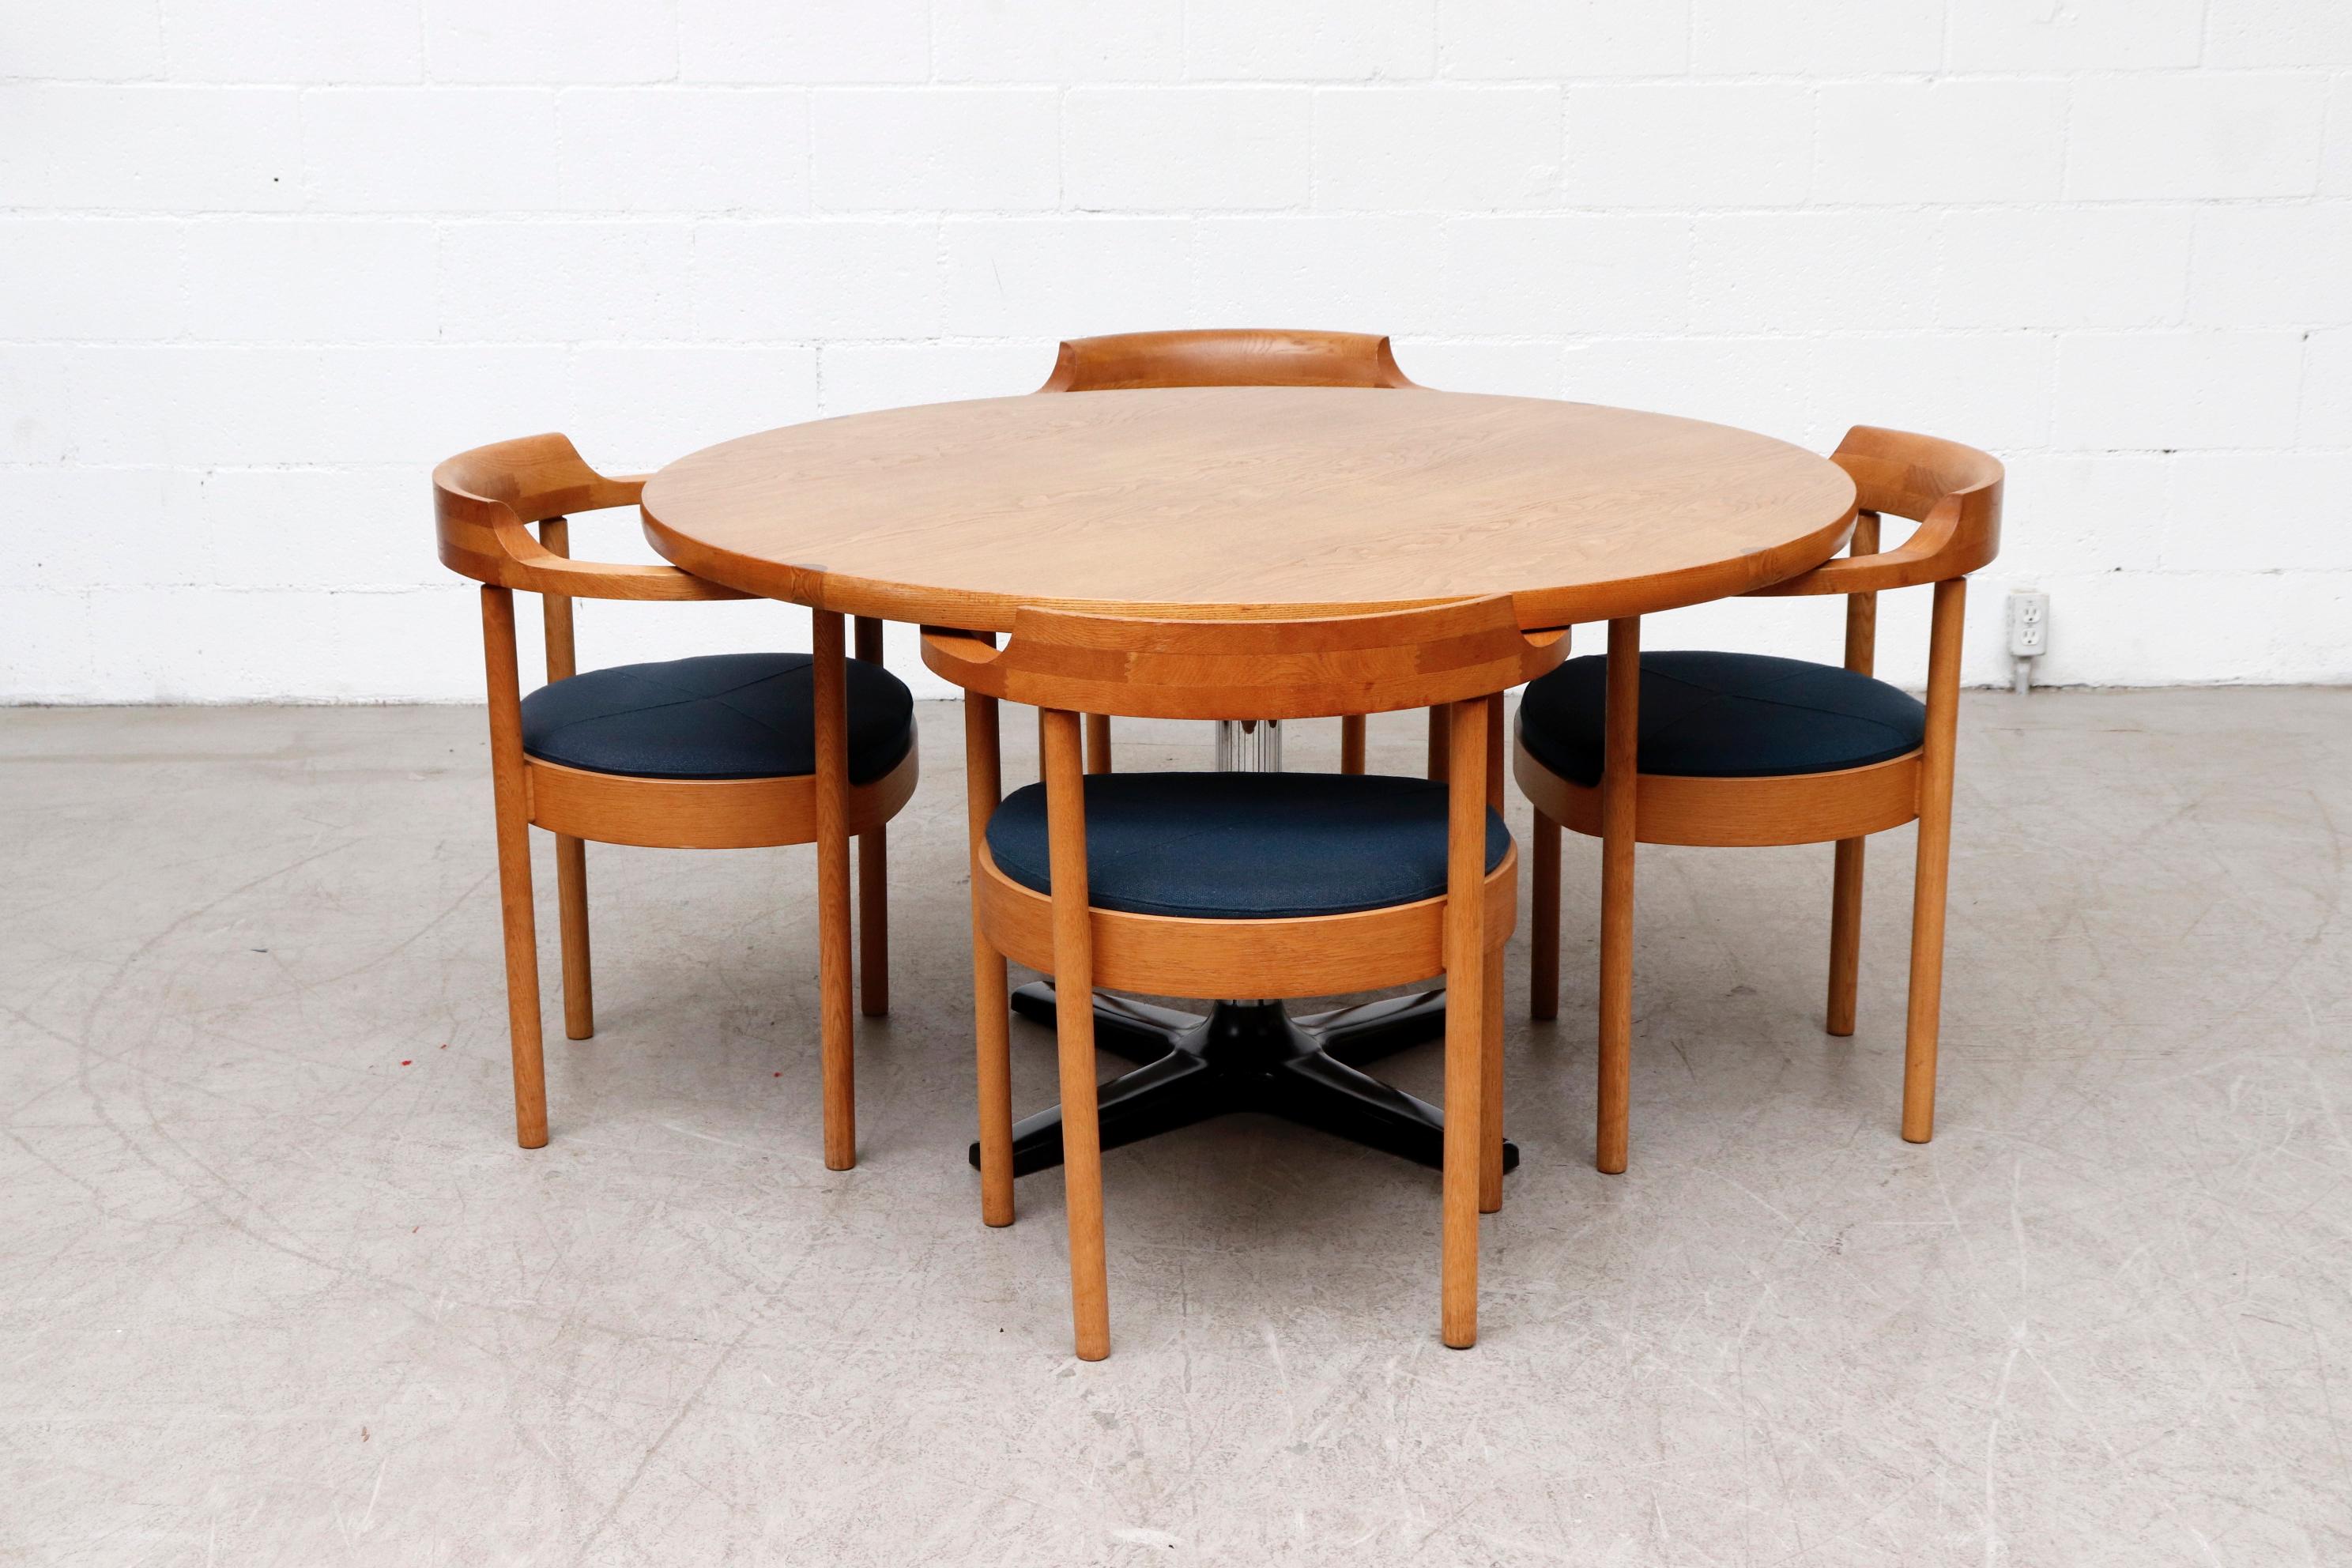 Rare, midcentury, round oak dining or center table with chrome and enameled metal pedestal base manufactured by iconic Dutch manufacturer Pastoe . The table features a lovely subtle contrasting inlaid detail on the top and is lightly refinished,